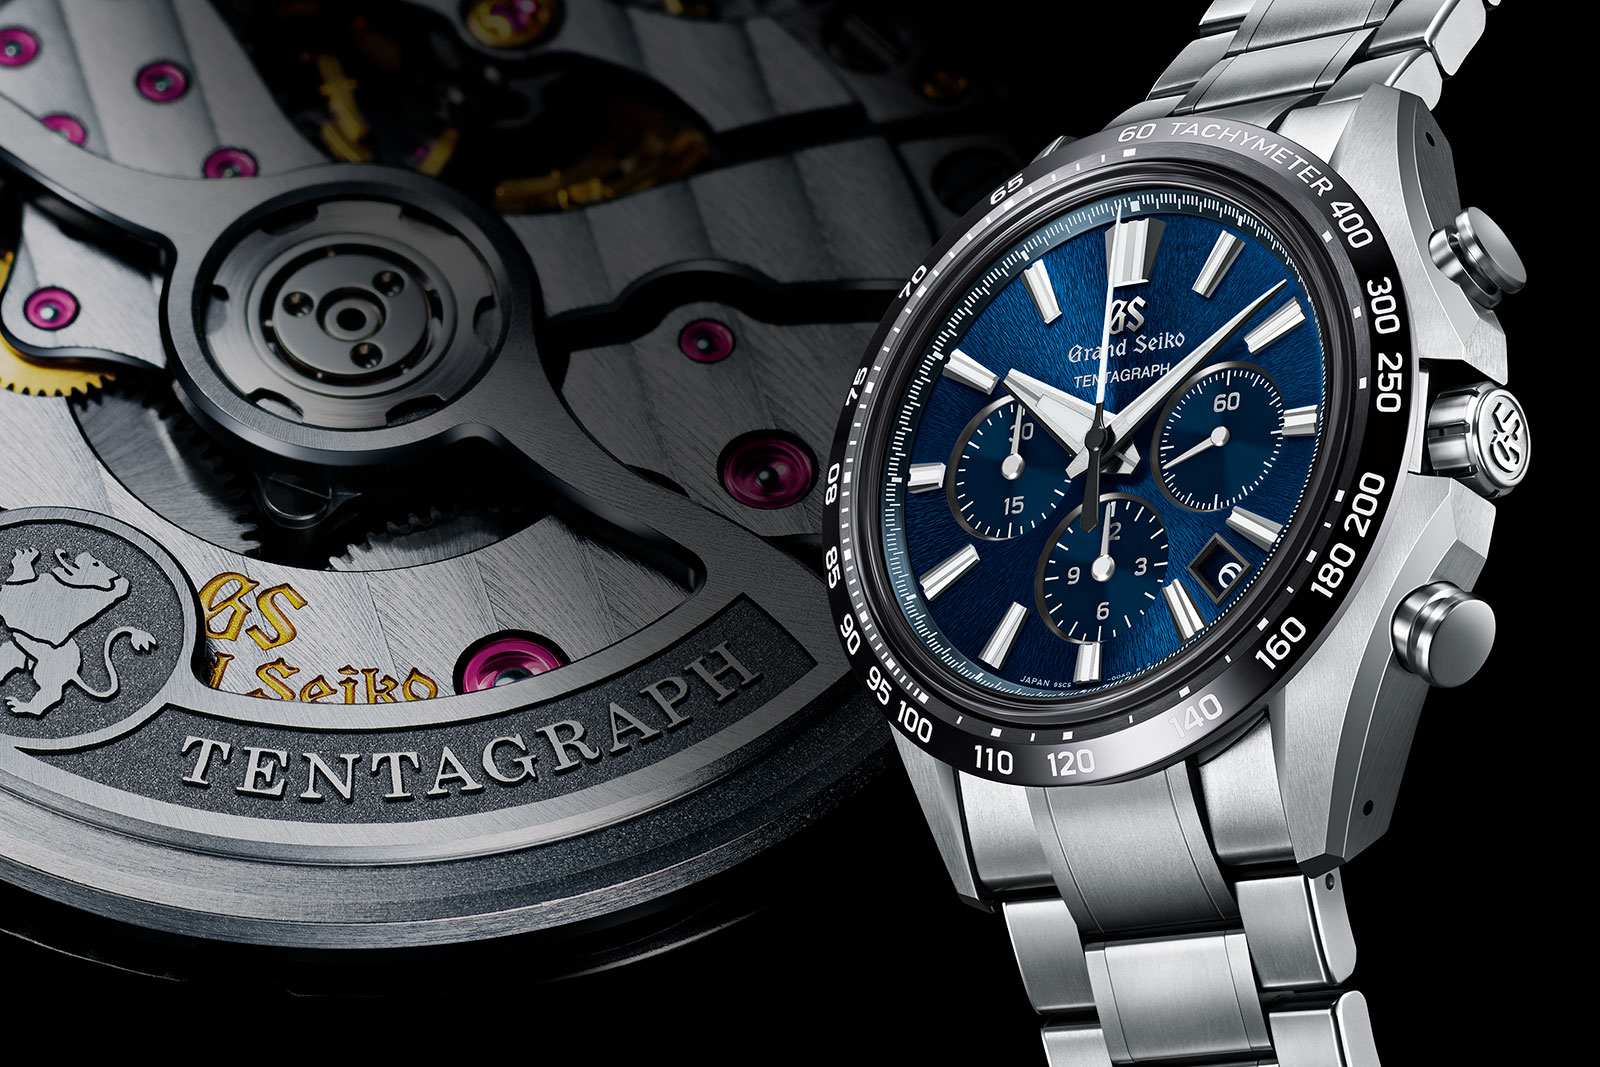 A close look at the Seiko brand portfolio and what it can teach us